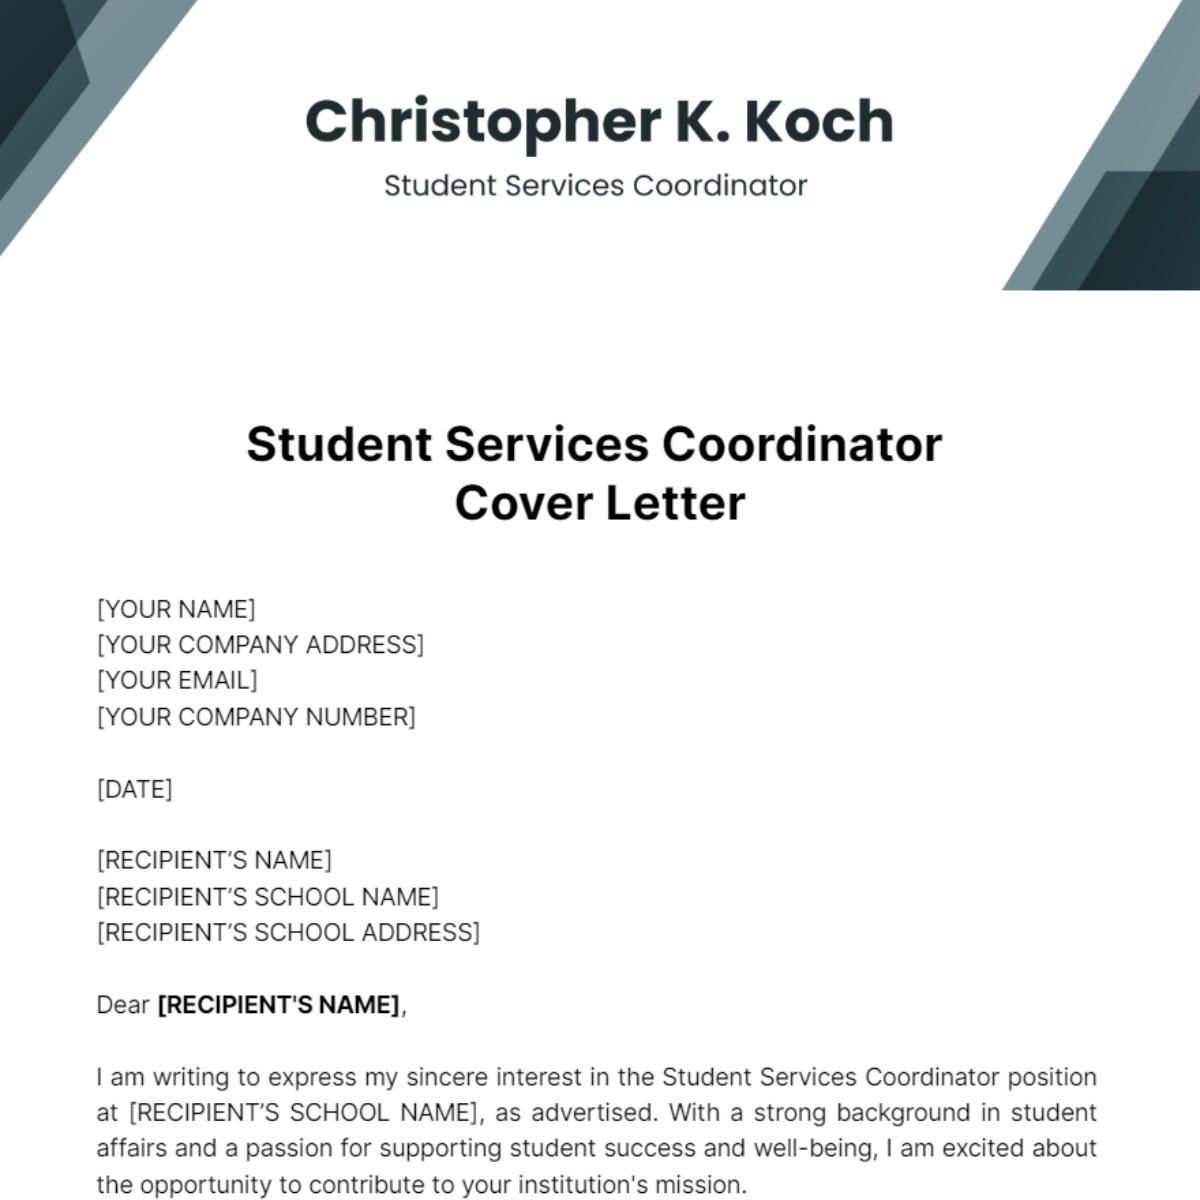 Student Services Coordinator Cover Letter Template